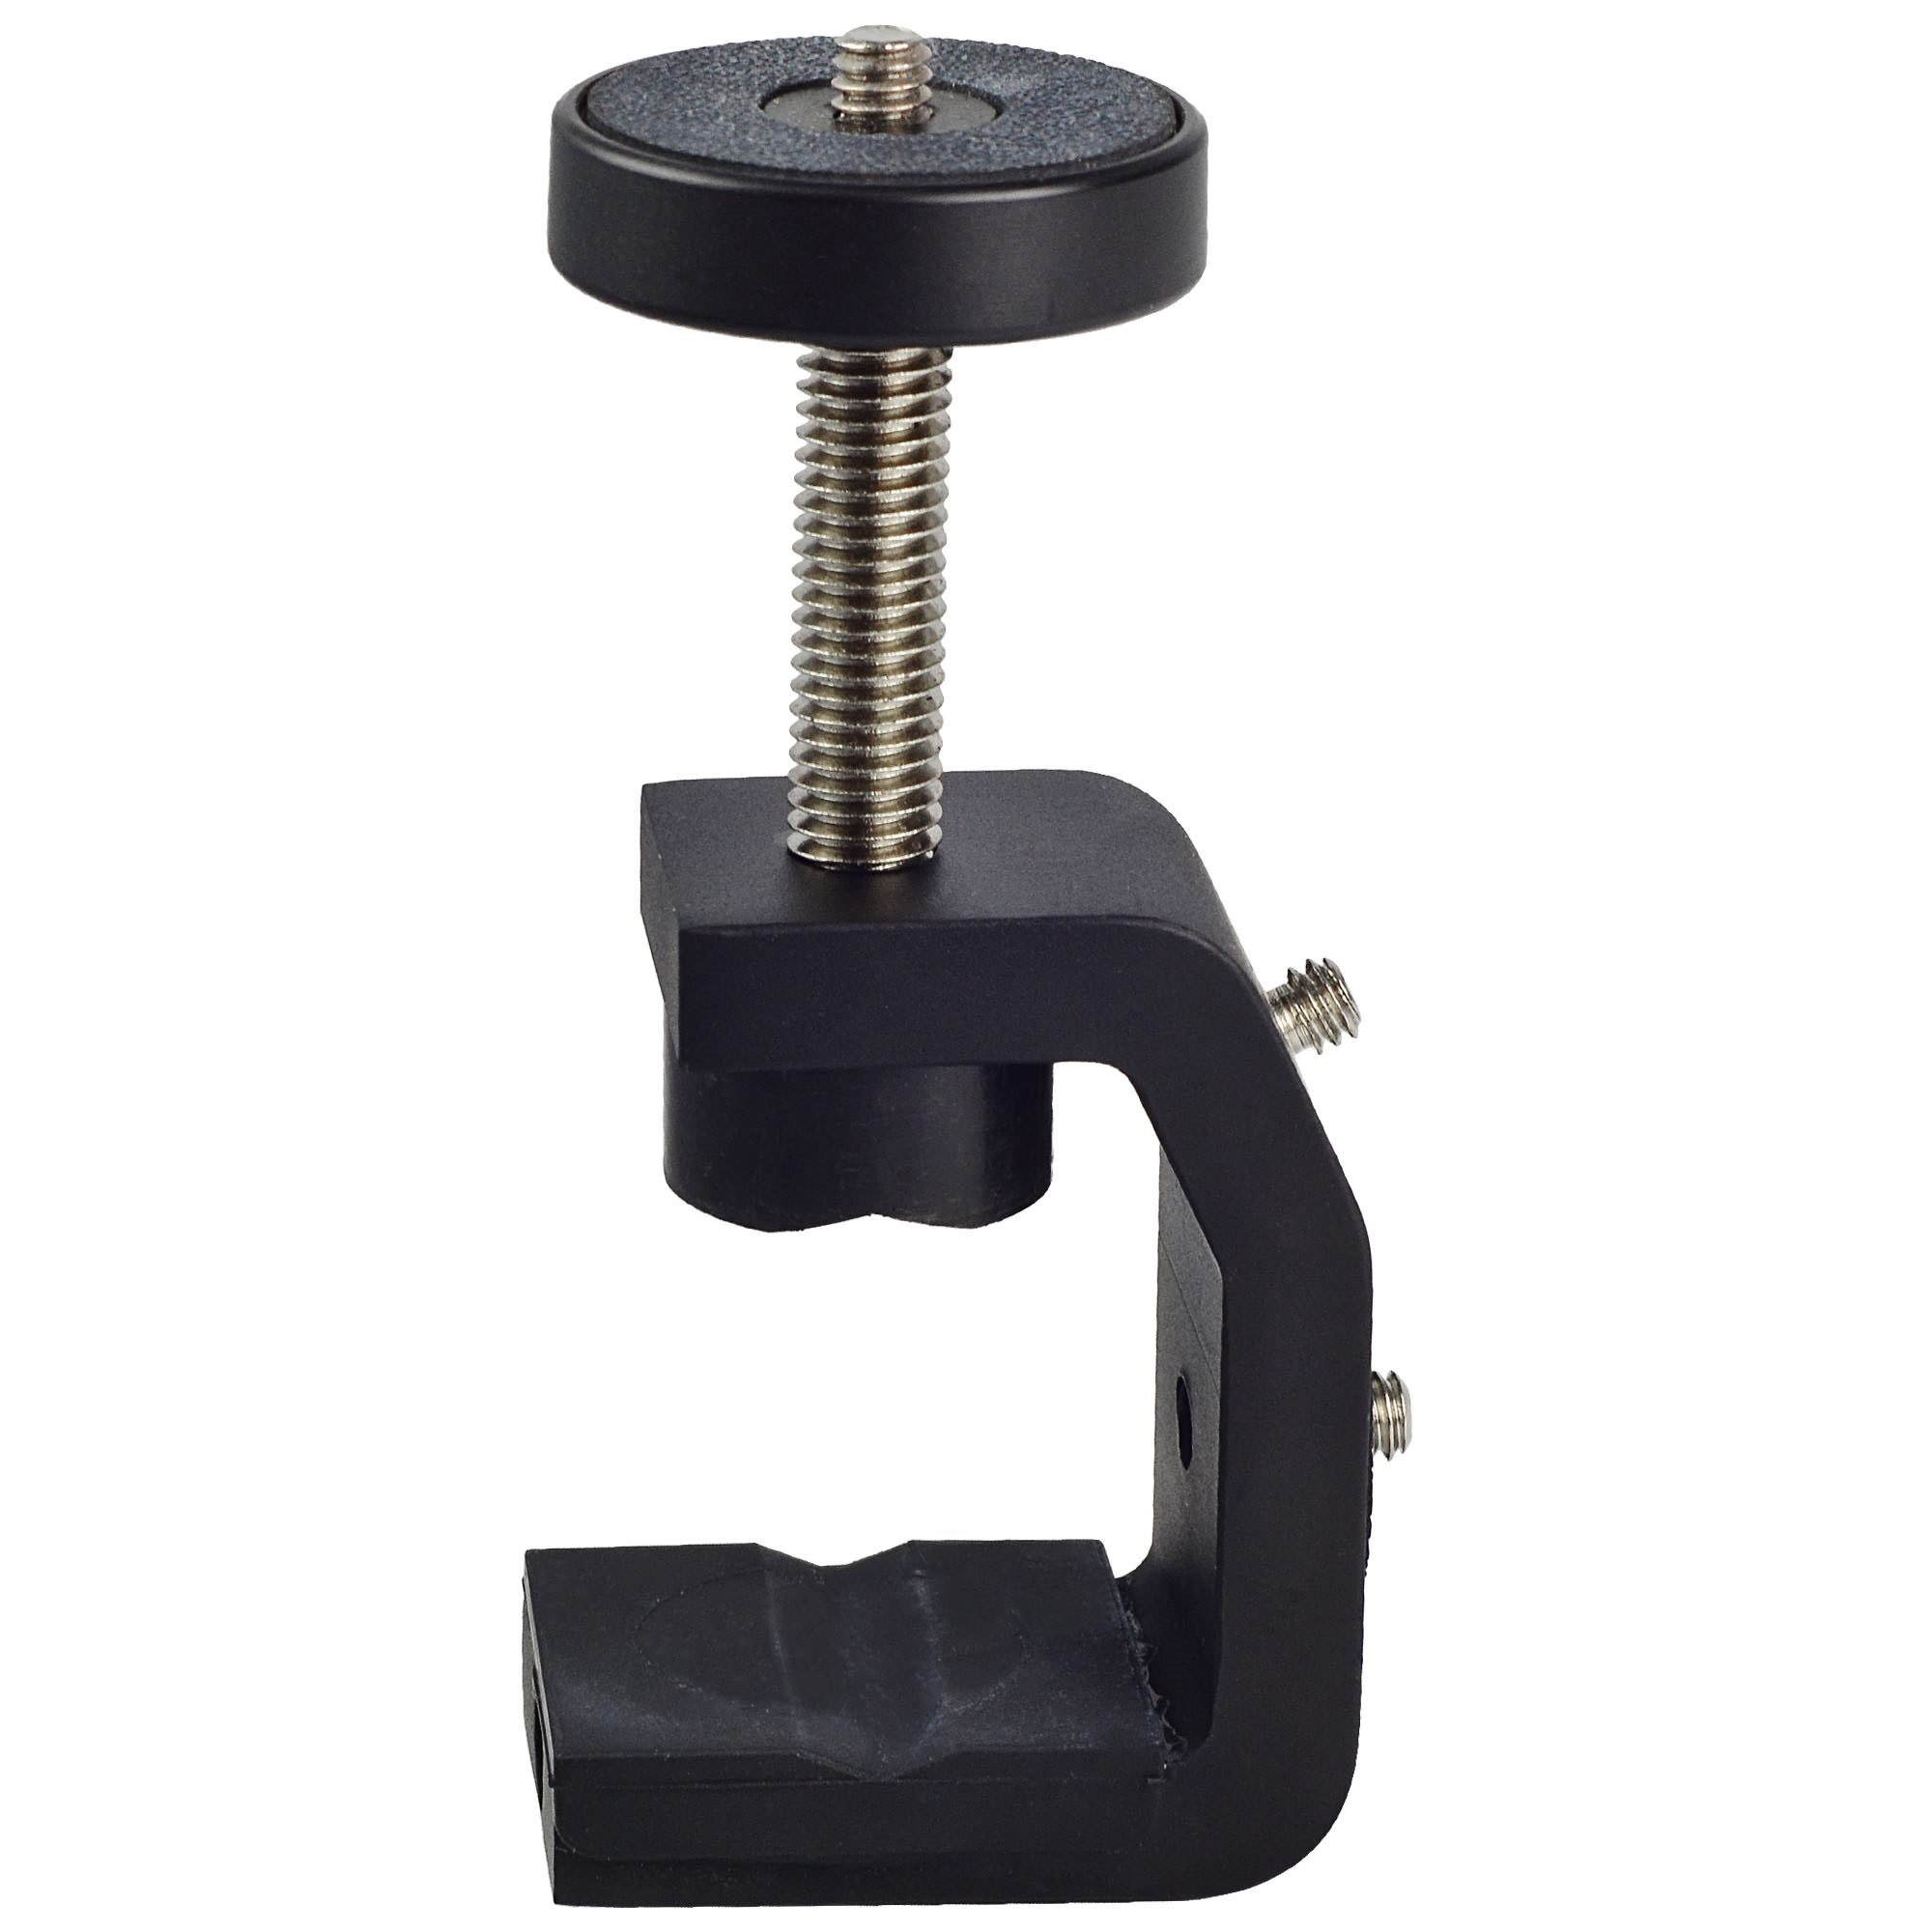 MengsPhoto | MENGS® 1/4″ Screw Universal Clip For Camera Clamp ...